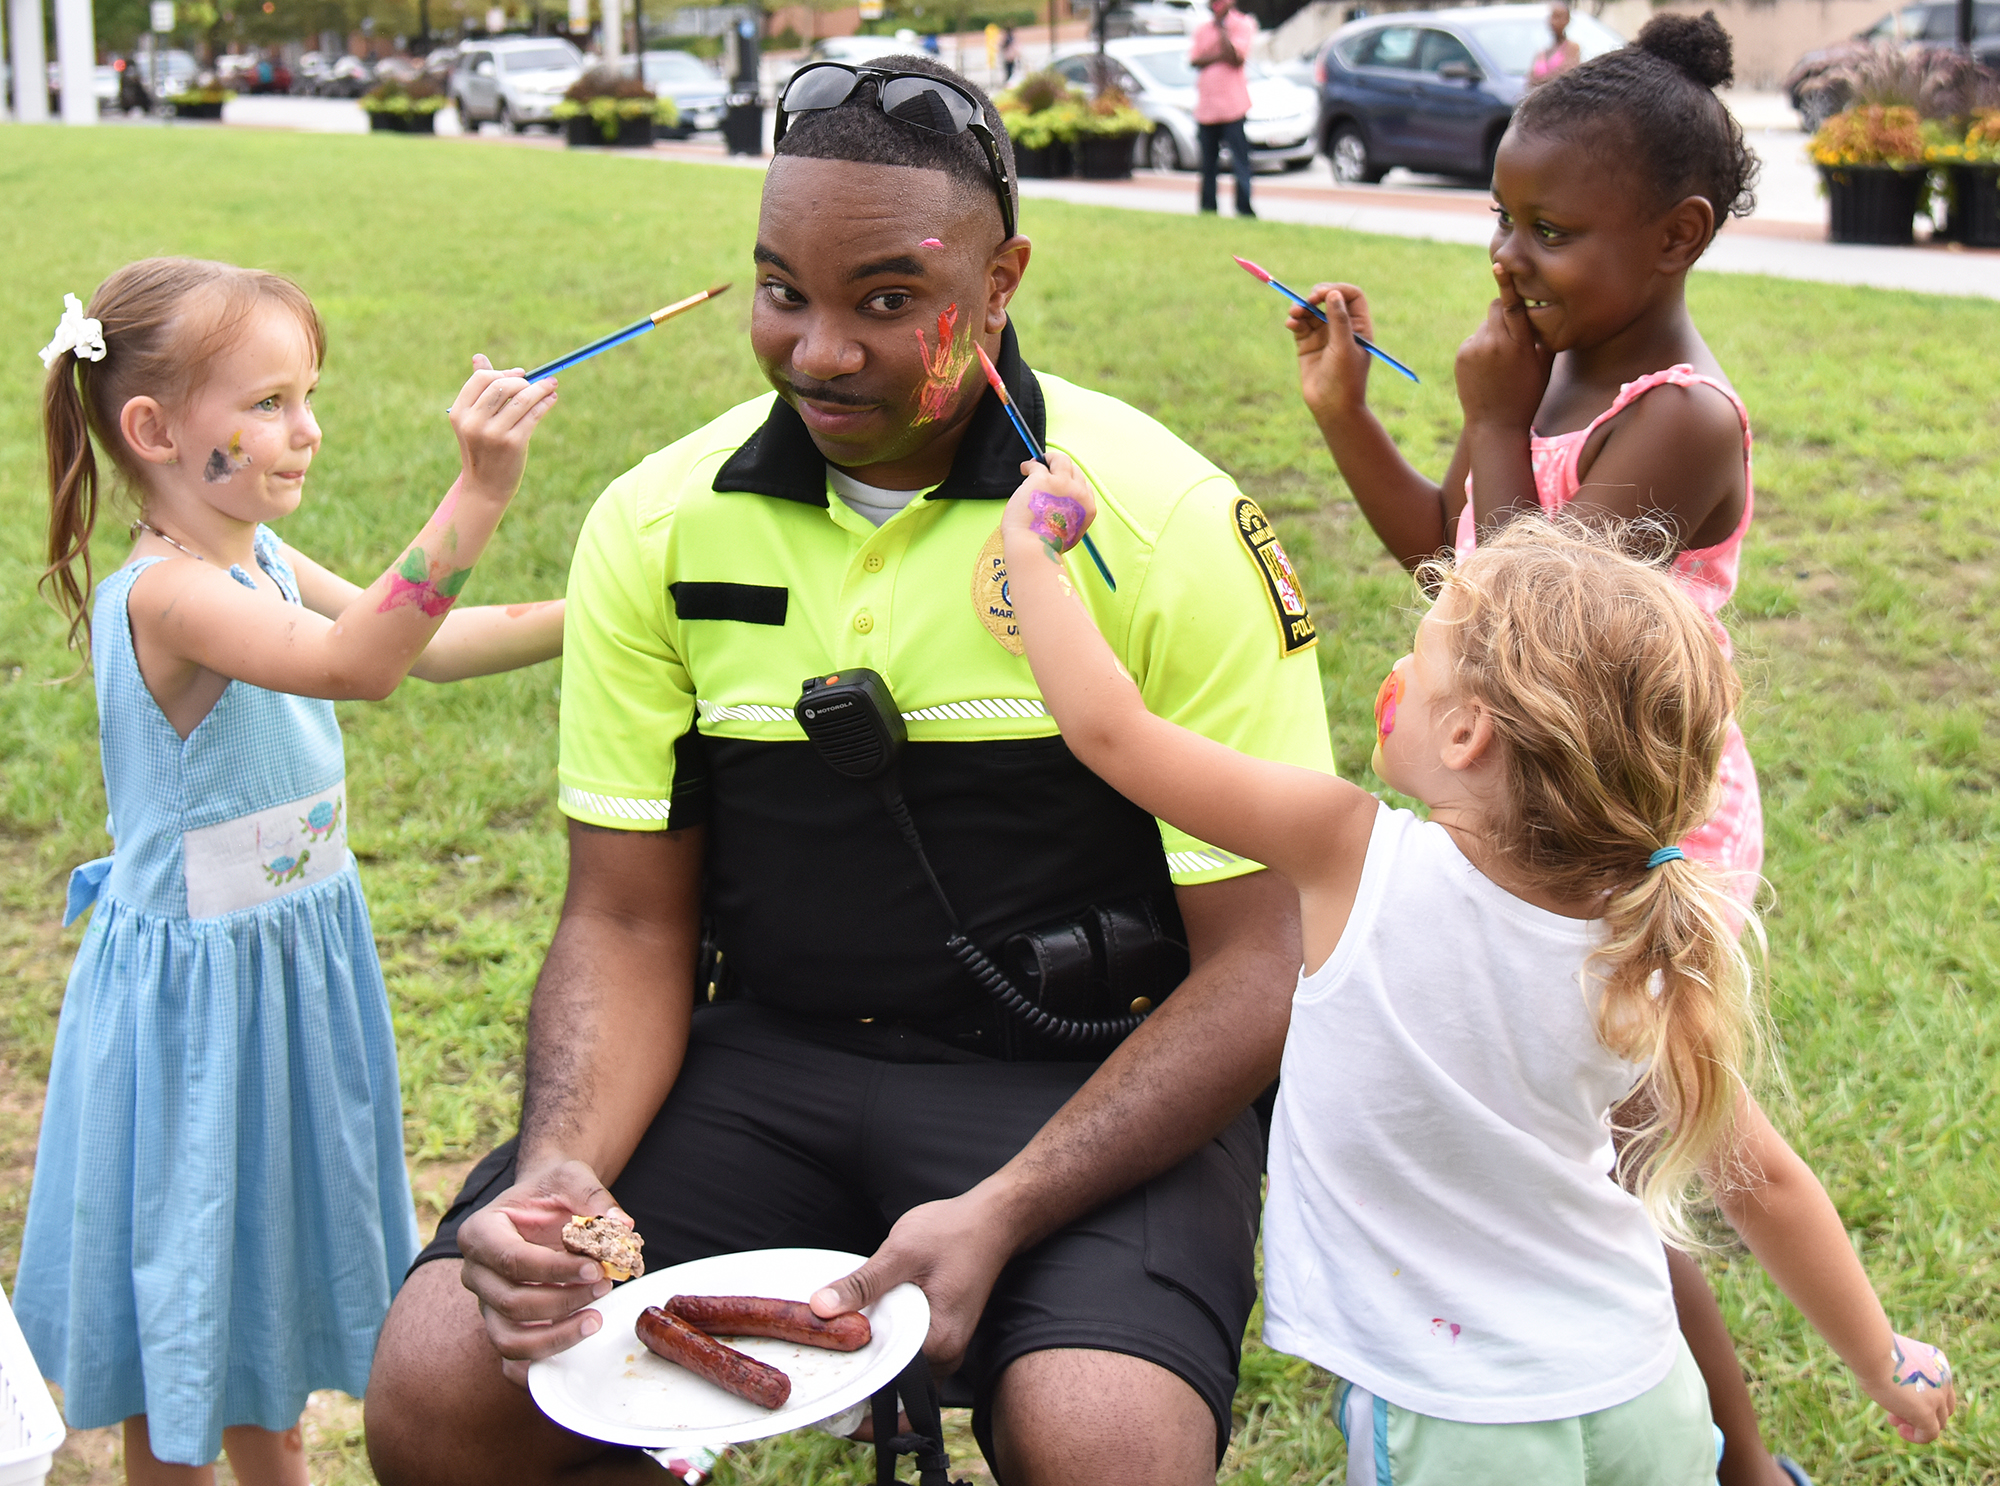 UMBPD officer has his face painted by 3 children.